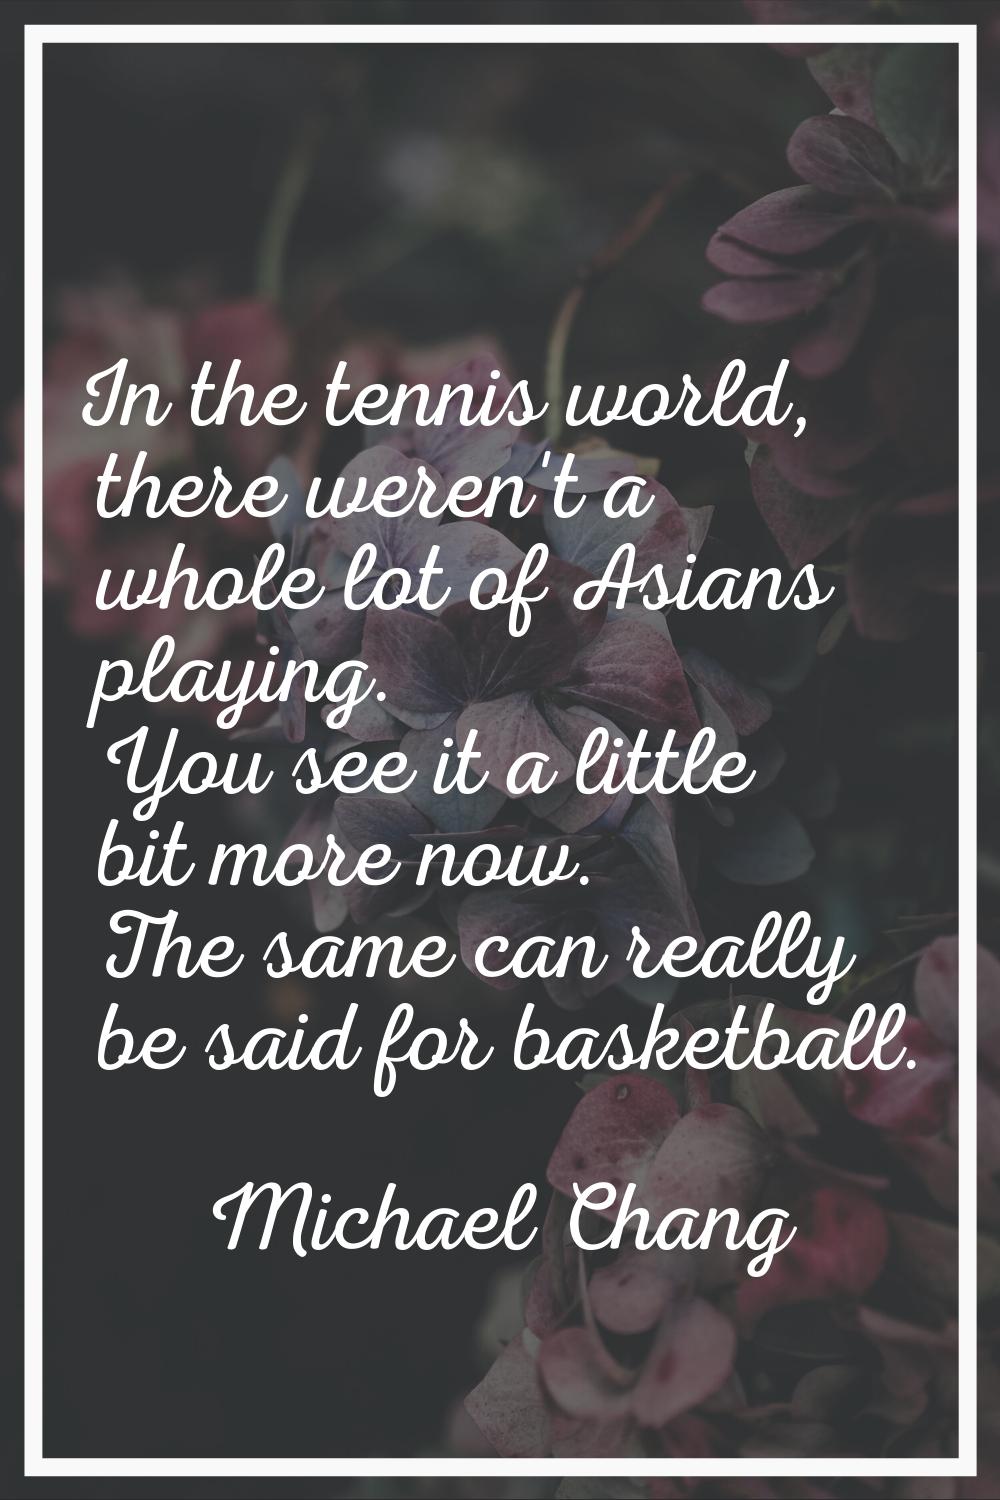 In the tennis world, there weren't a whole lot of Asians playing. You see it a little bit more now.